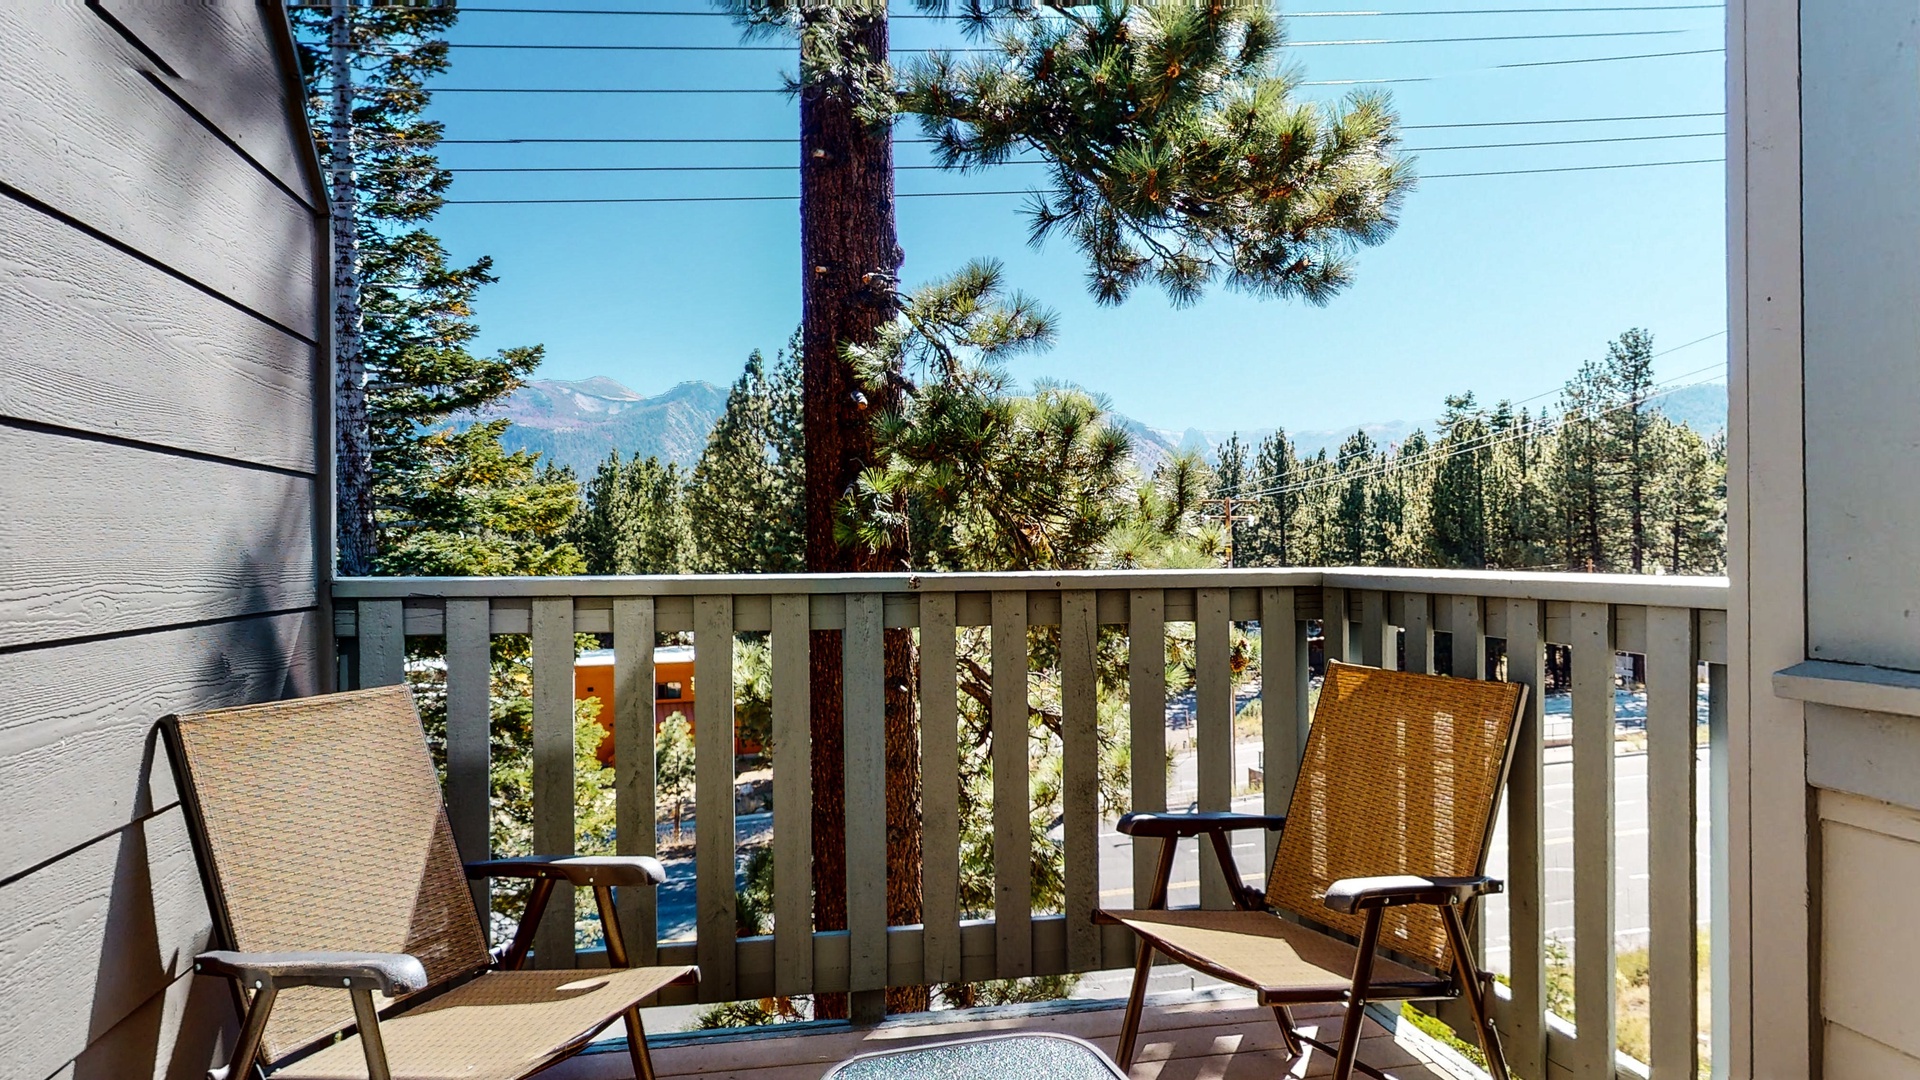 Mammoth forest and mountain views on the balcony!